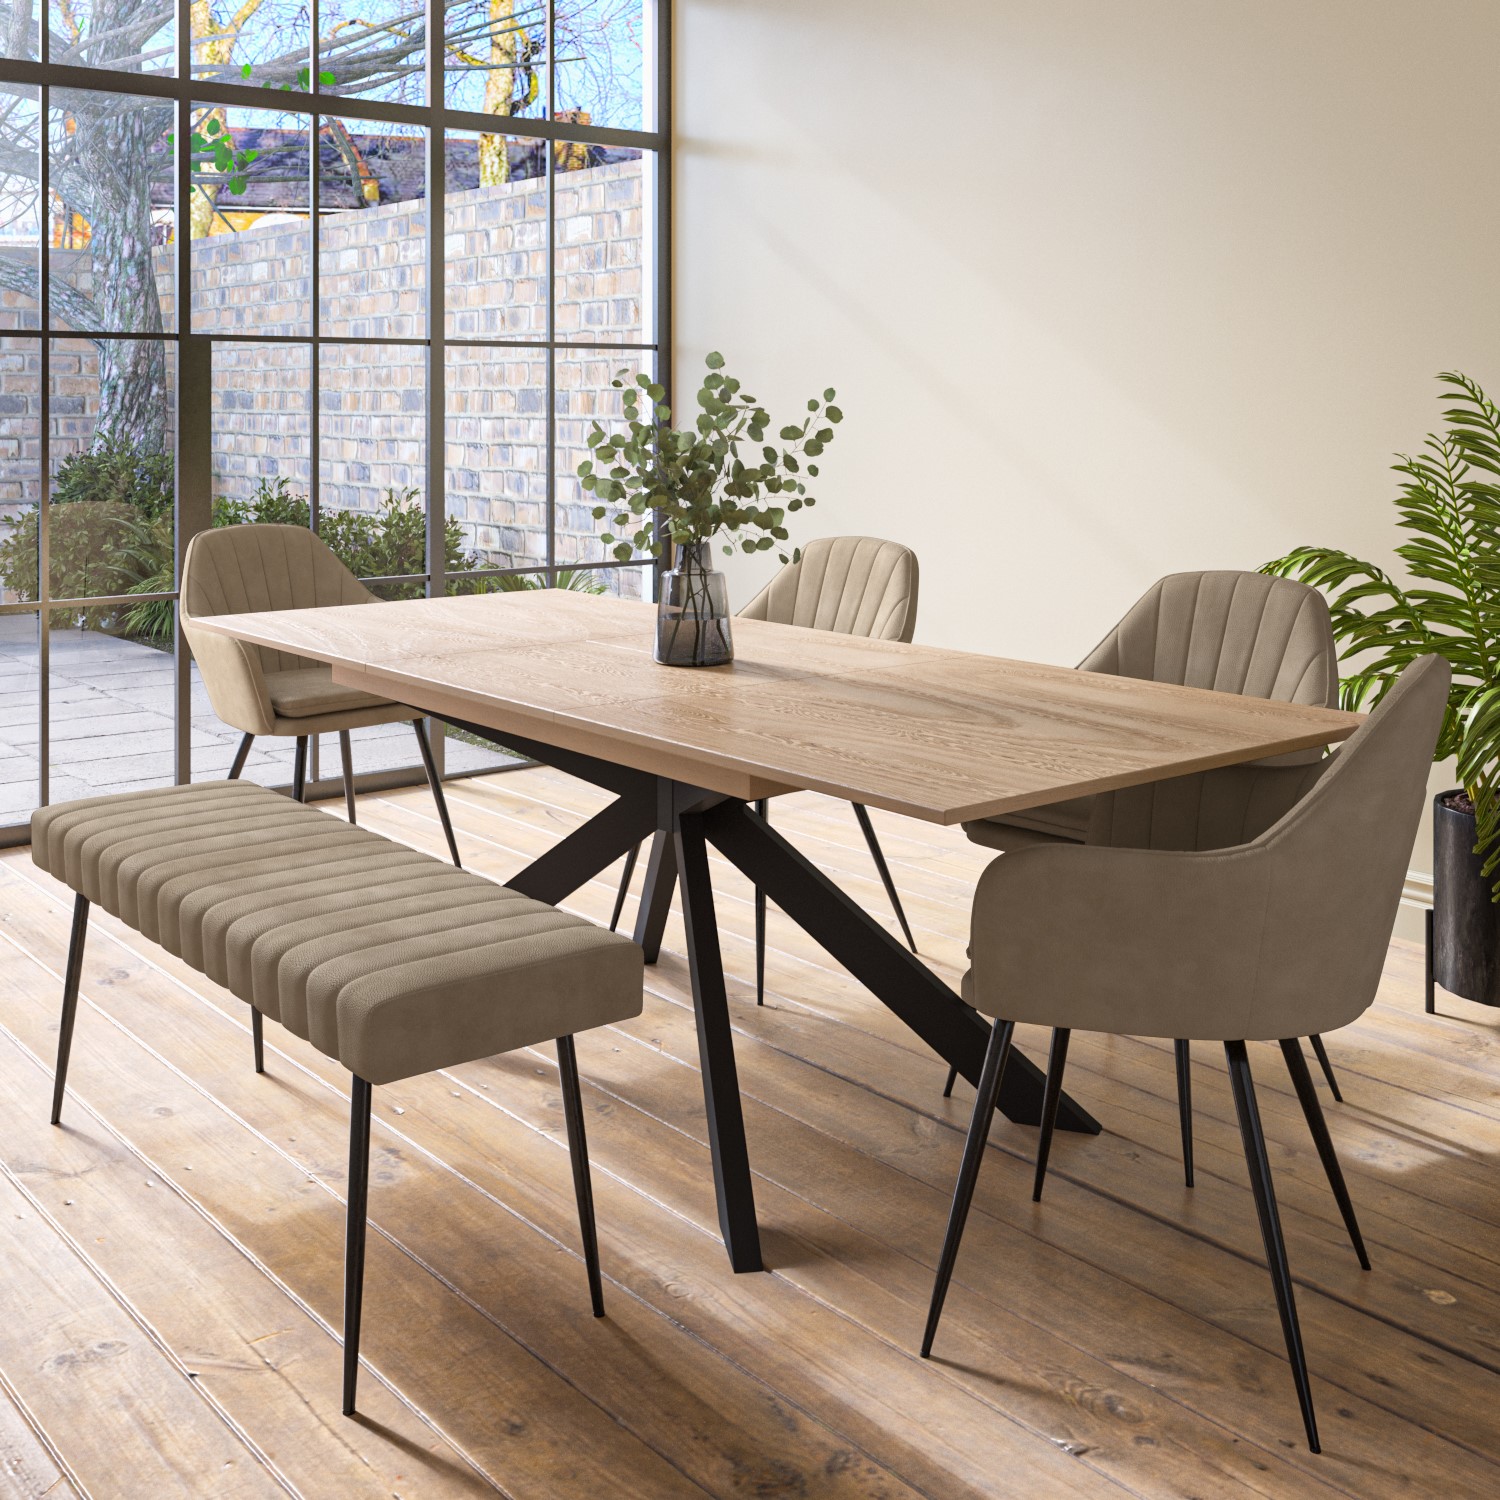 Photo of Extendable oak dining table with 4 beige faux leather dining chairs and 1 dining bench - seats 6 - carson